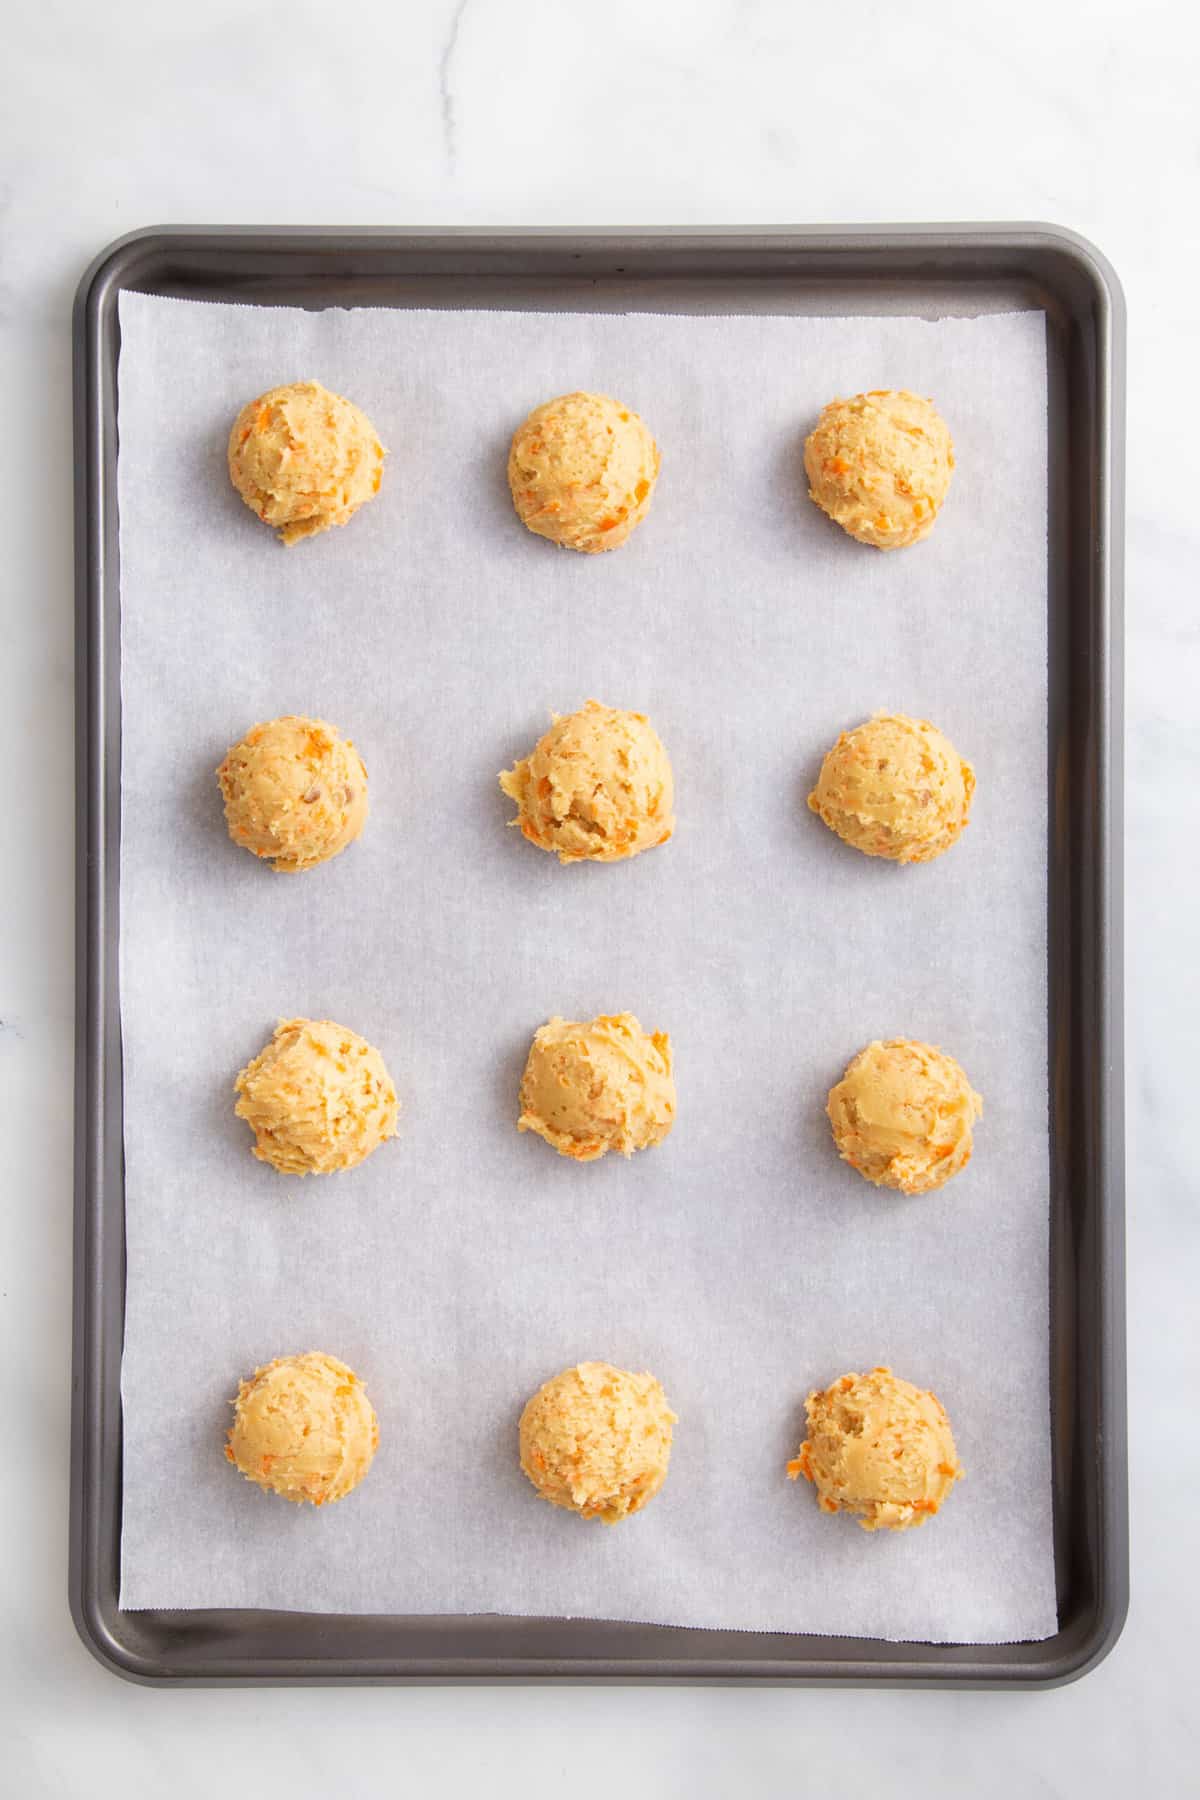 12 carrot cake cookie dough ball arranged on a parchment-lined baking sheet